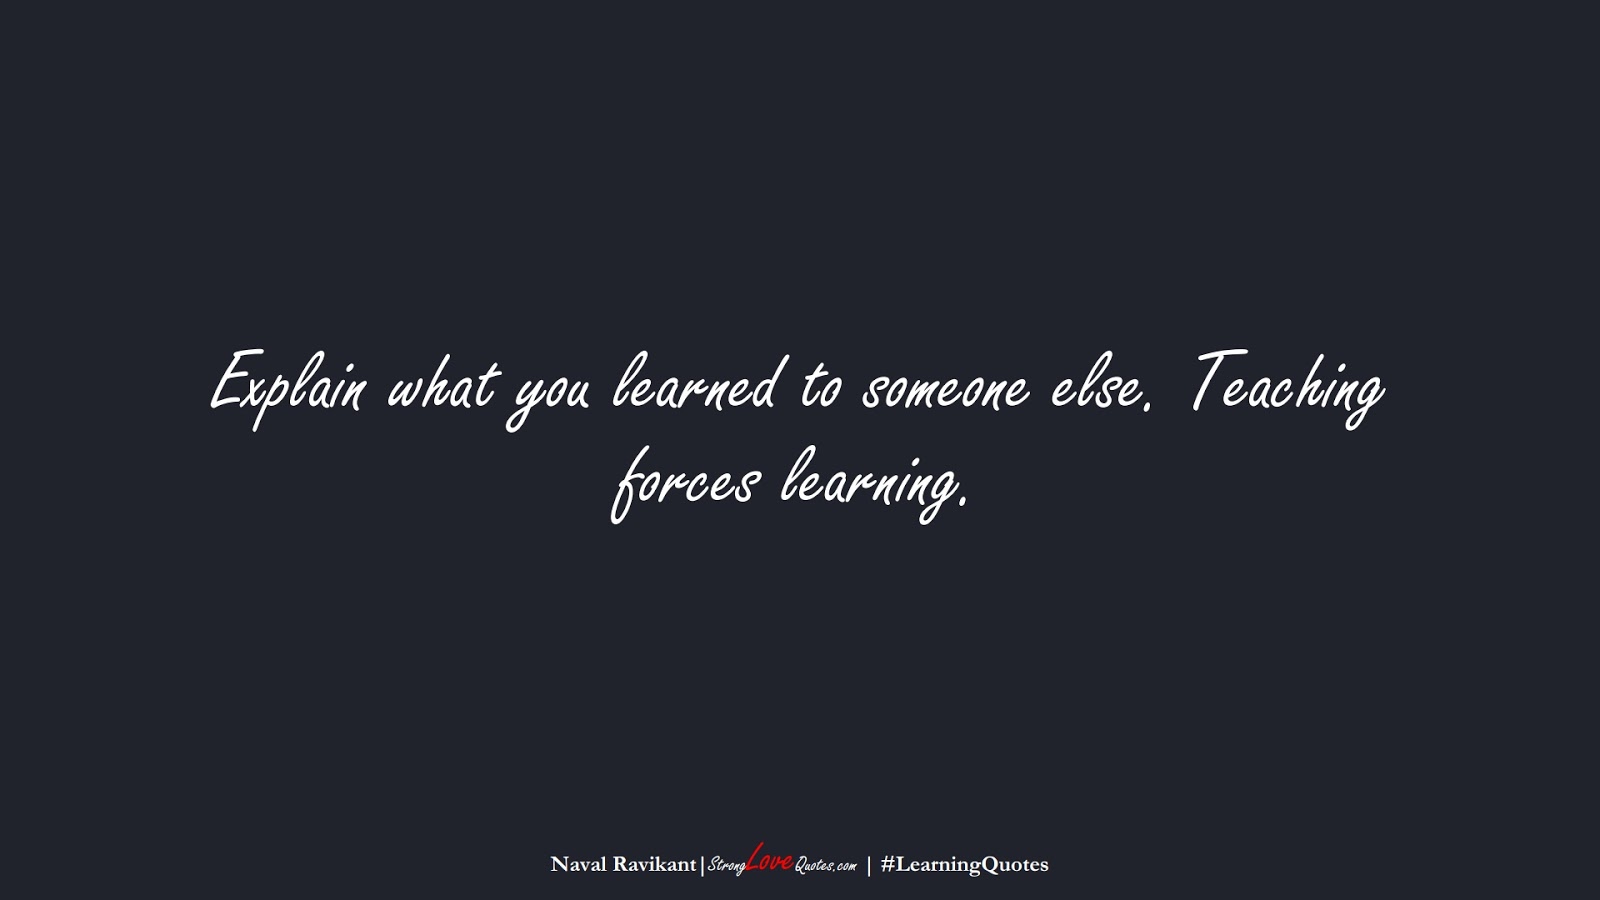 Explain what you learned to someone else. Teaching forces learning. (Naval Ravikant);  #LearningQuotes